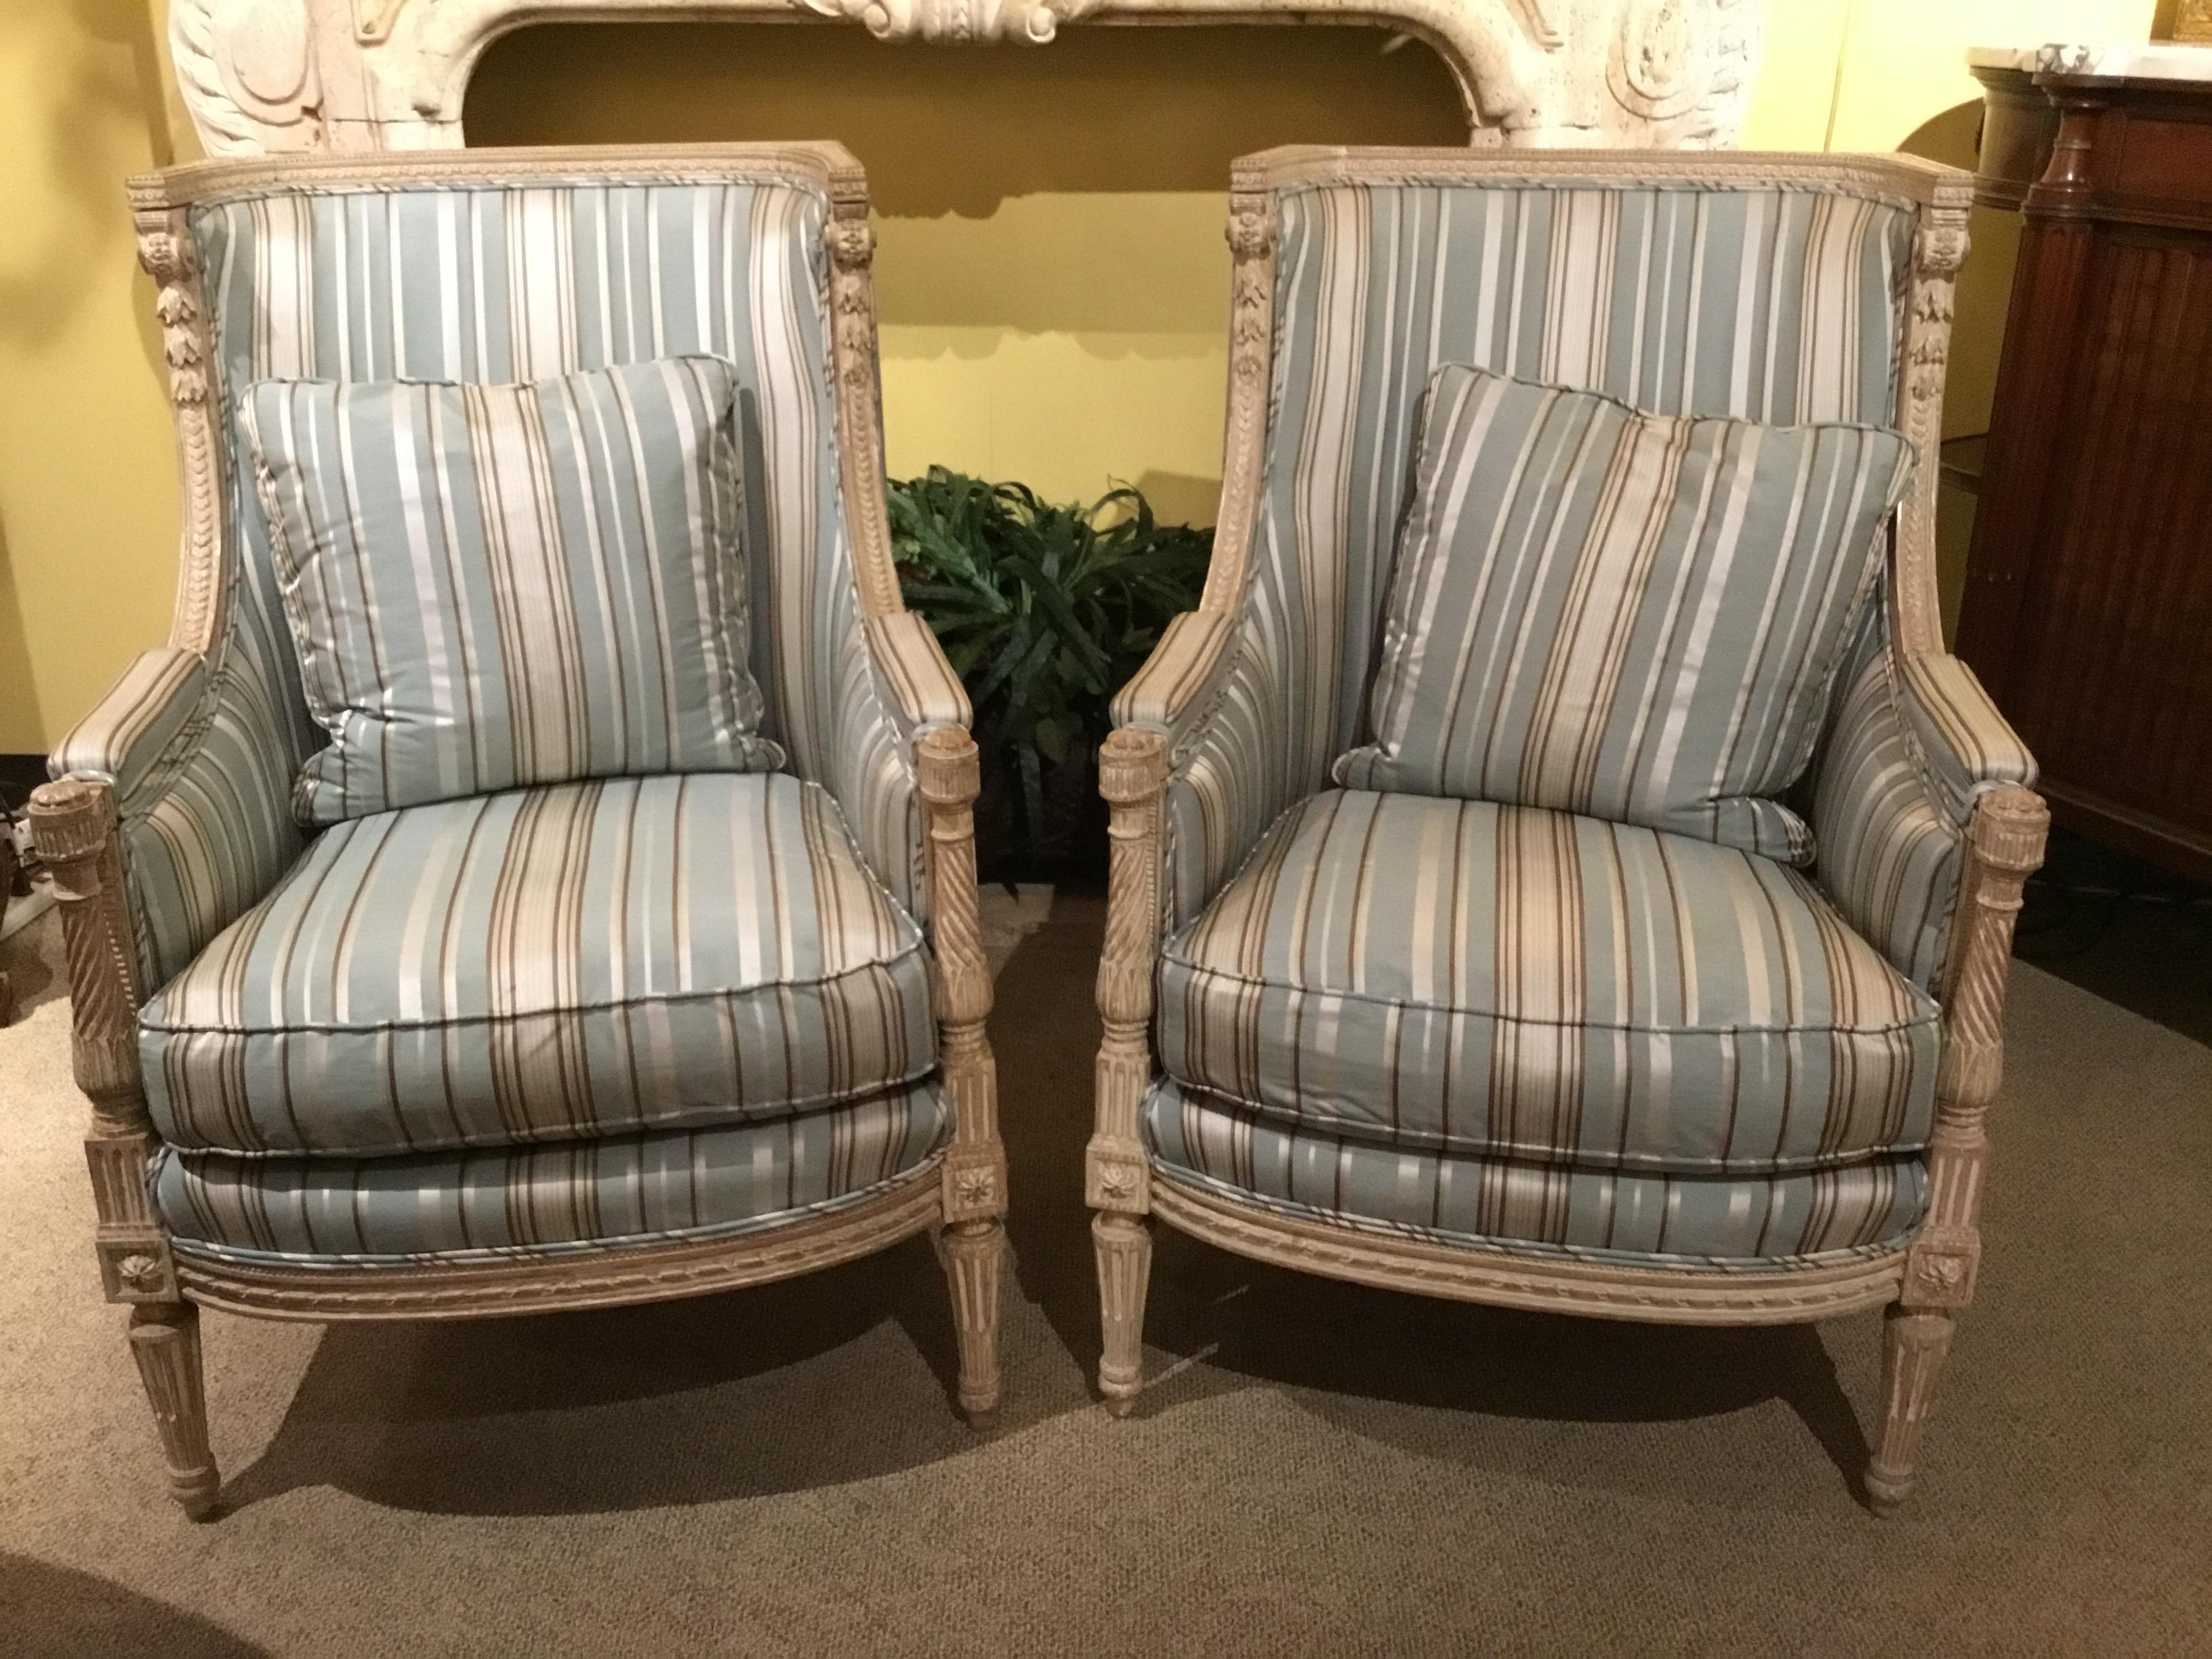 Fruitwood Pair of Louis XVI-Style Bergeres/Chairs, Late 19th Century in Polychrome Finish